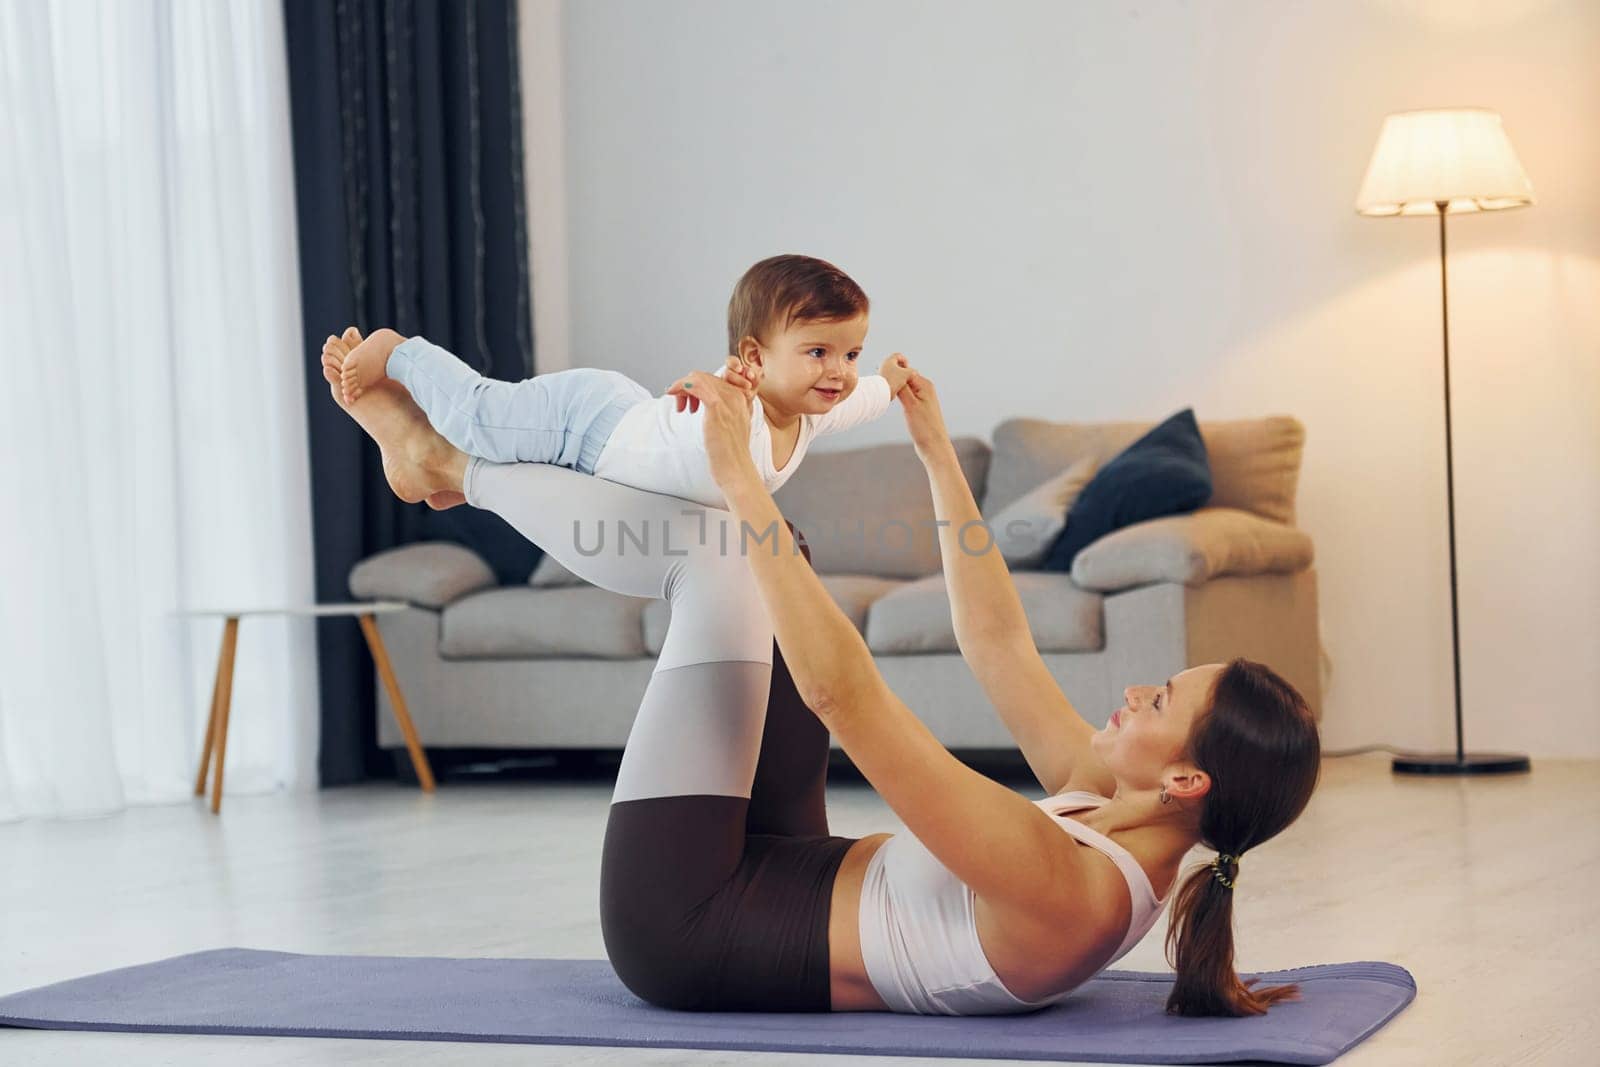 Doing fitness together. Mother with her little daughter is at home together by Standret